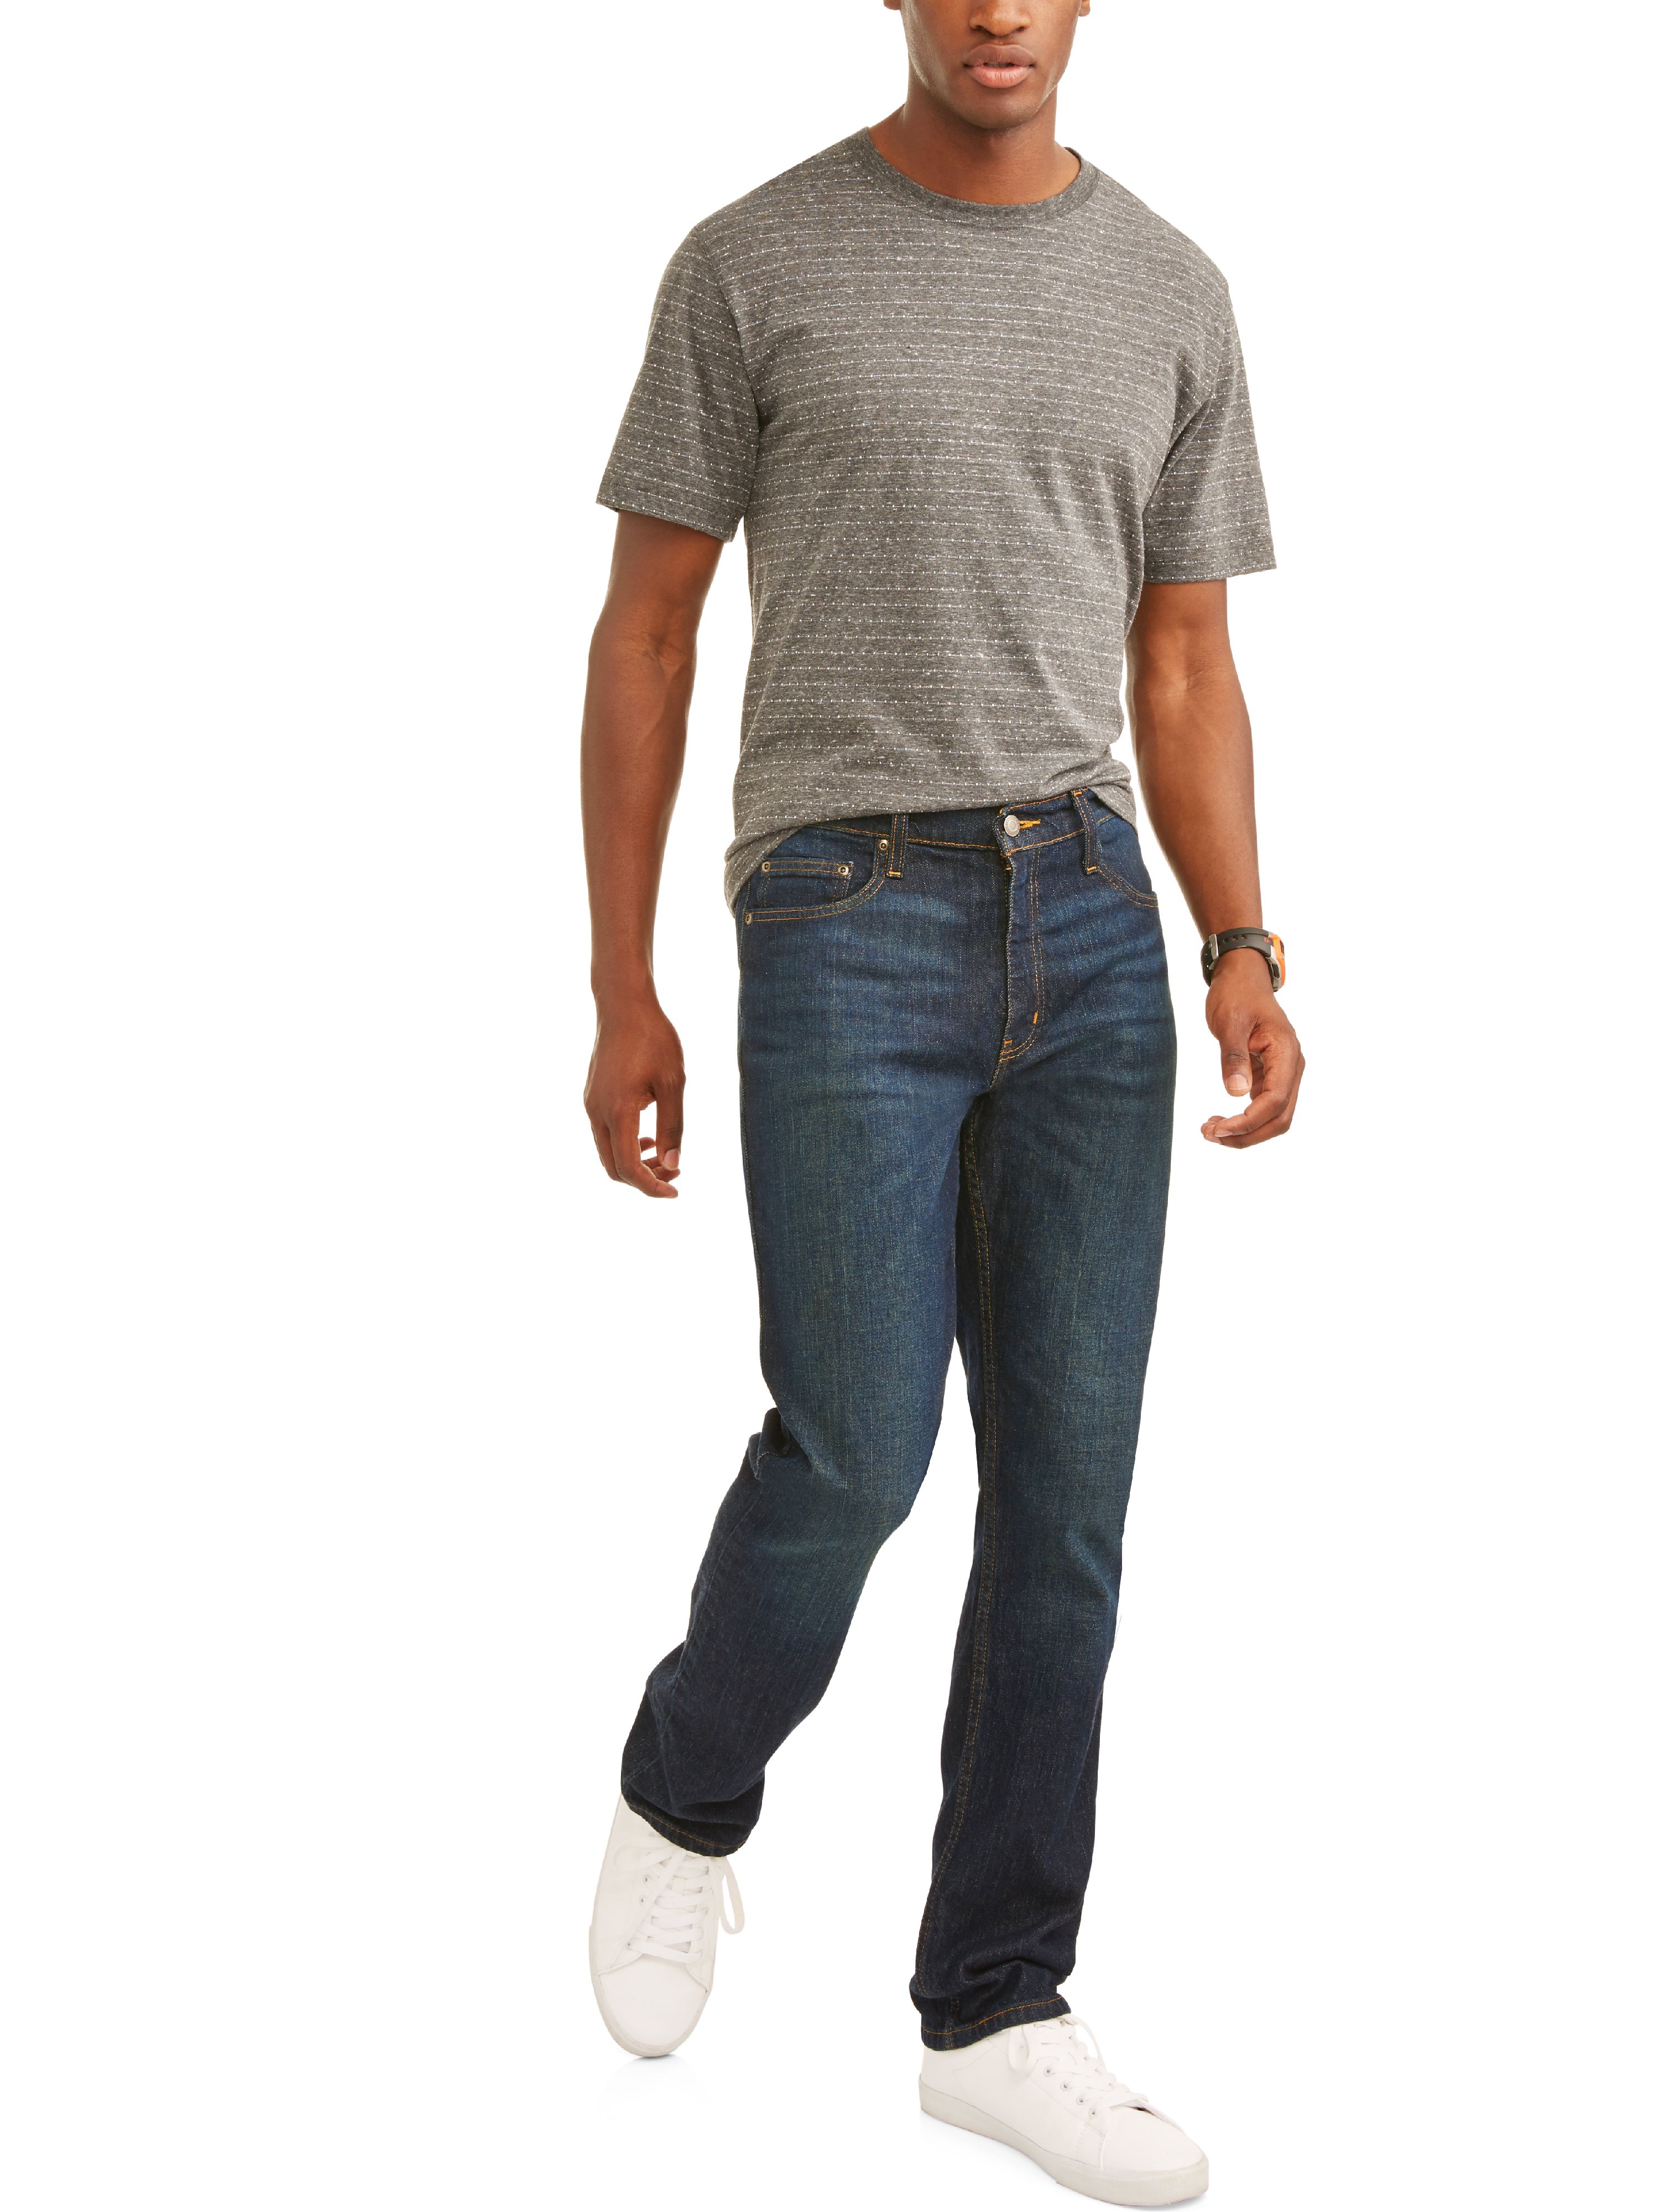 George Men's Straight Fit Jeans - image 5 of 5